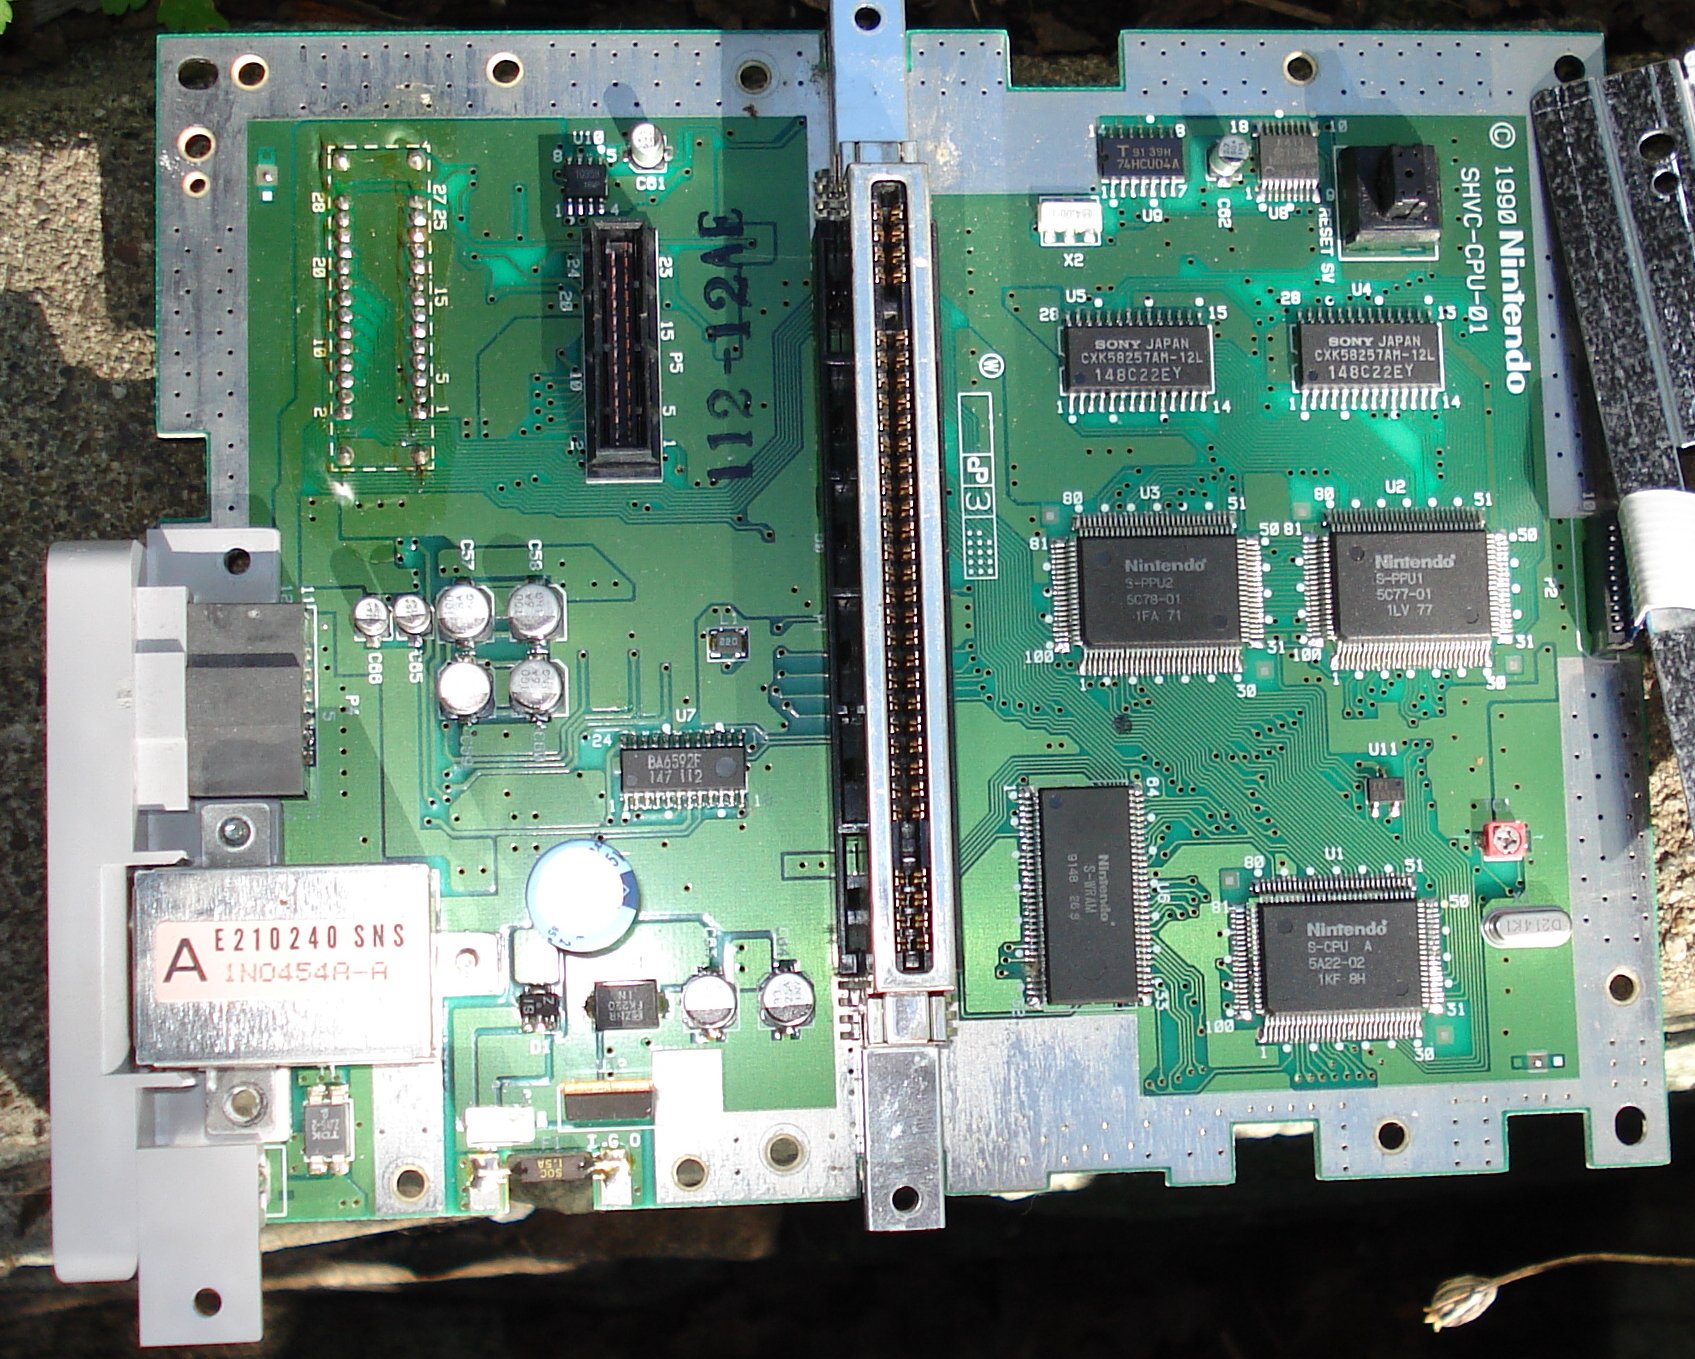 Large picture of the motherboard of the SUPER NES